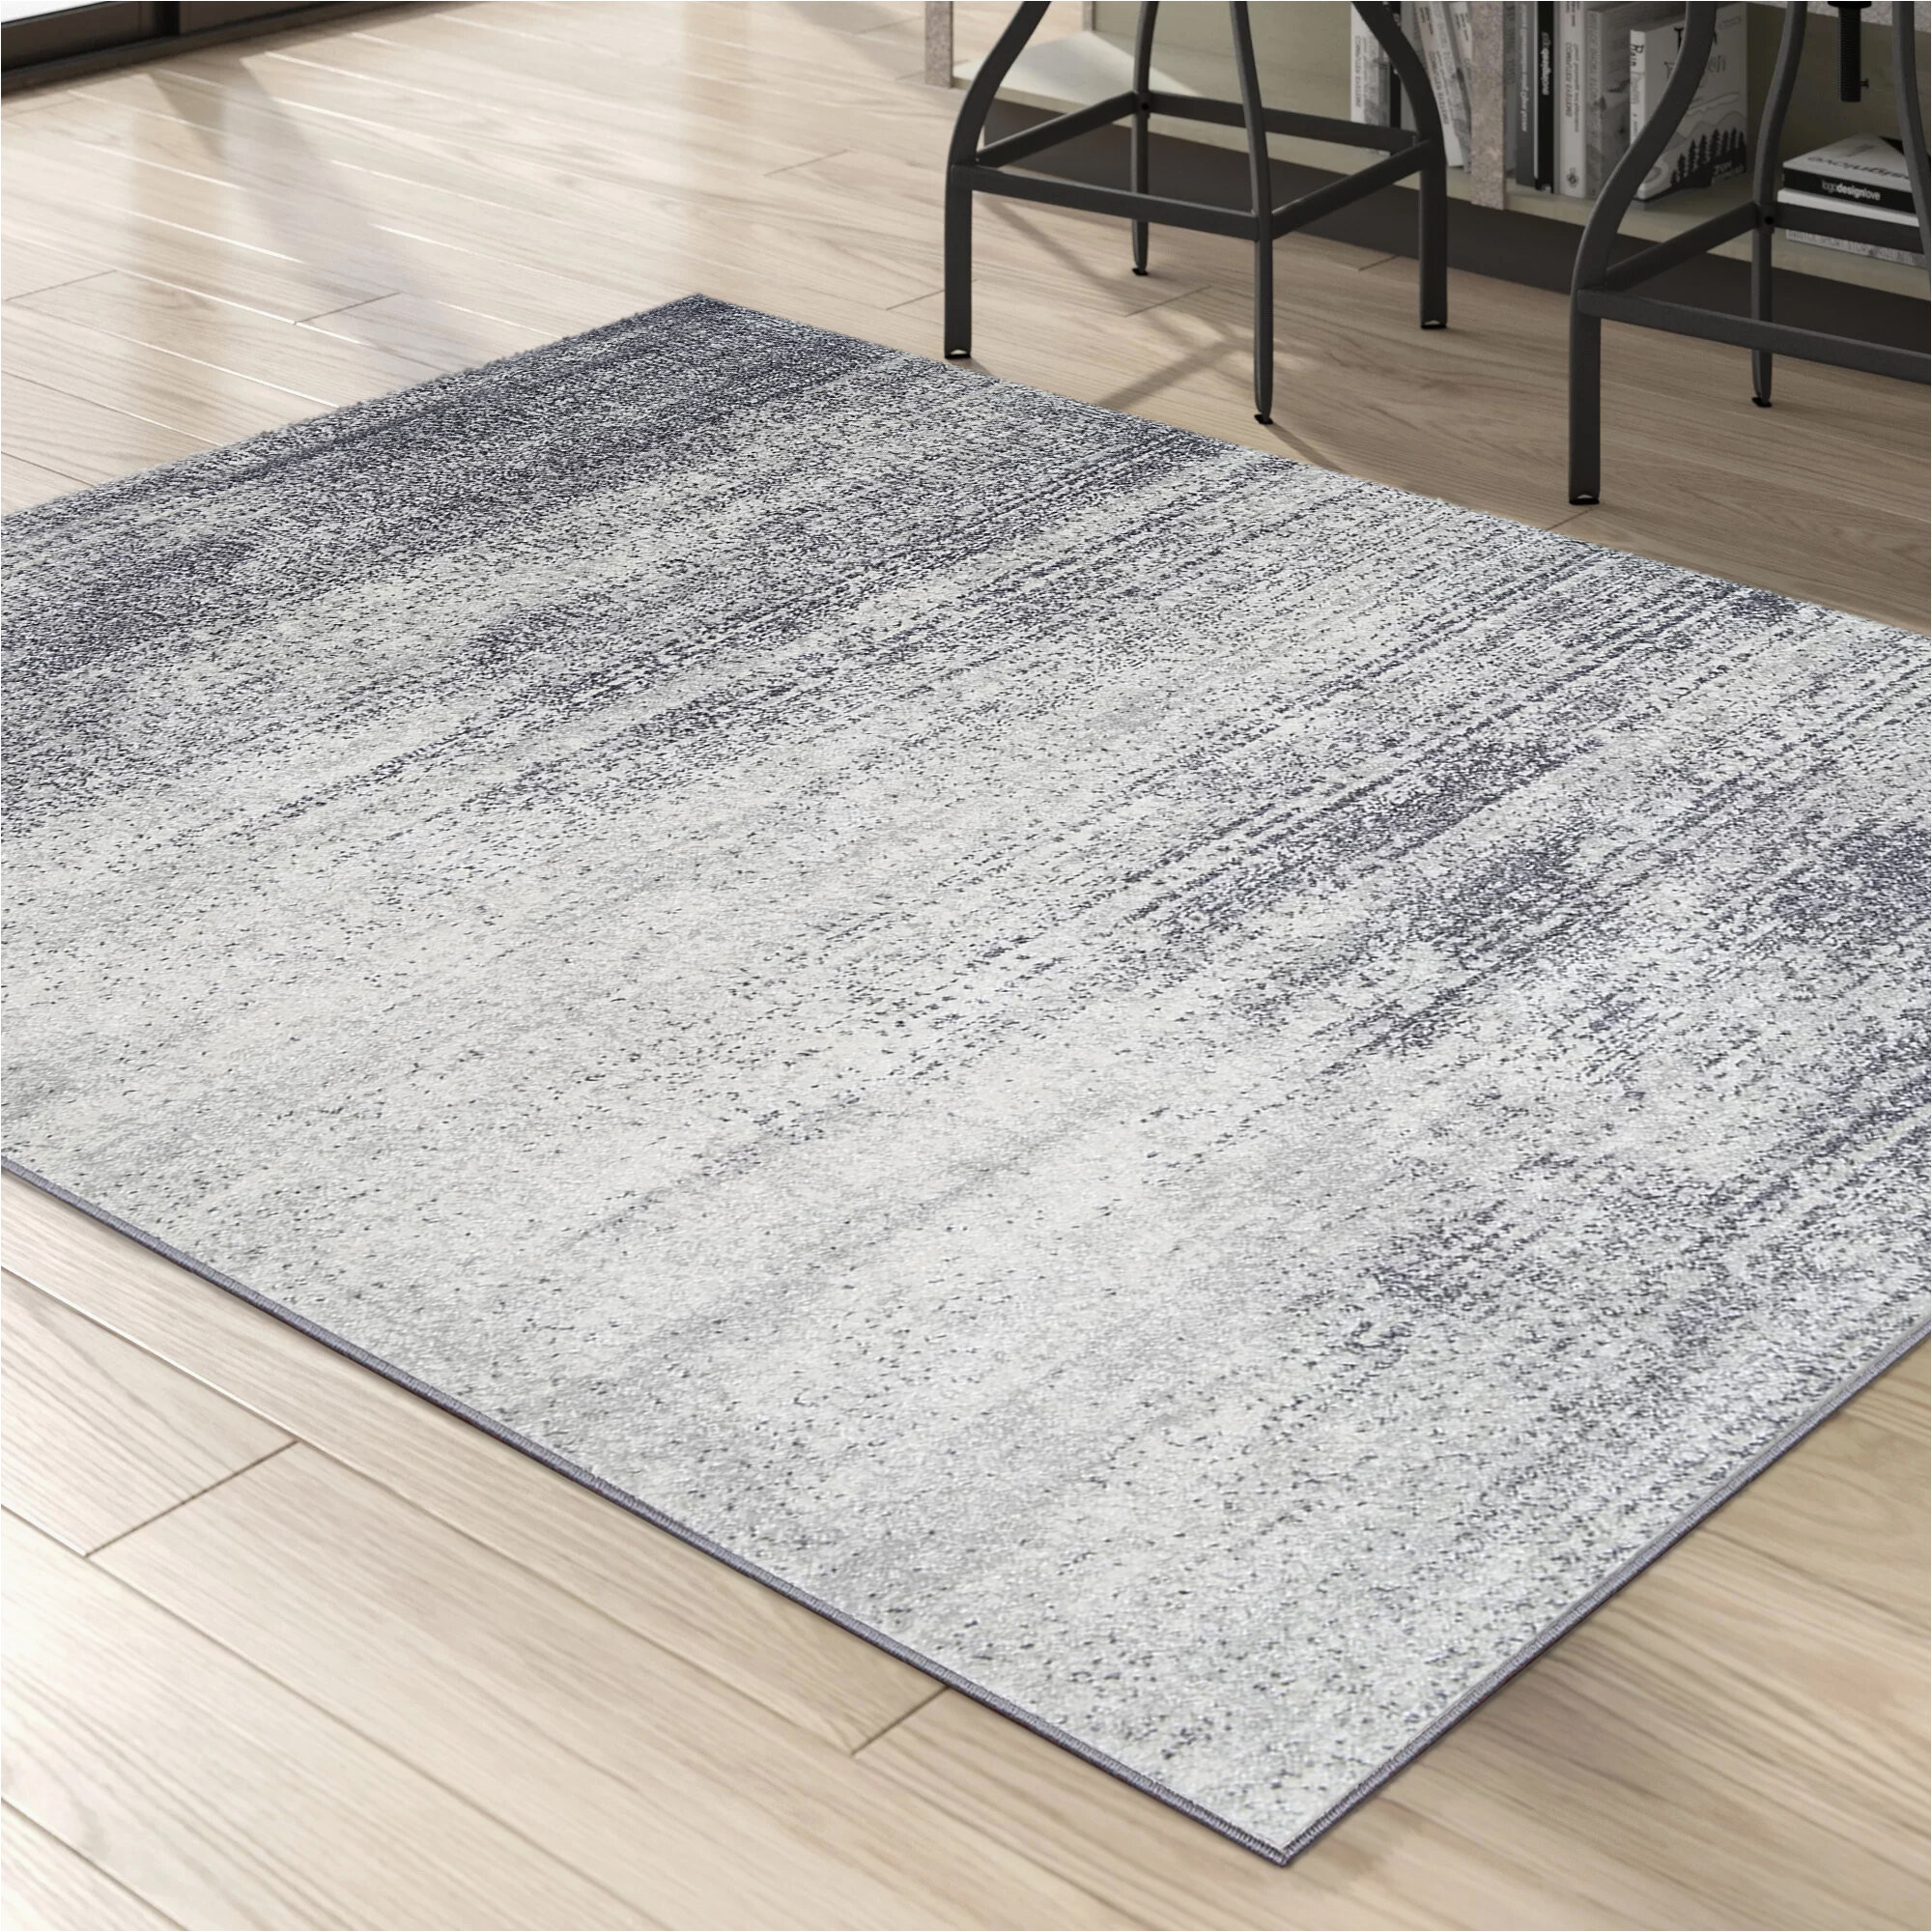 Area Rug for Gray Floor Williston forge Belden Abstract Gray/white area Rug & Reviews …